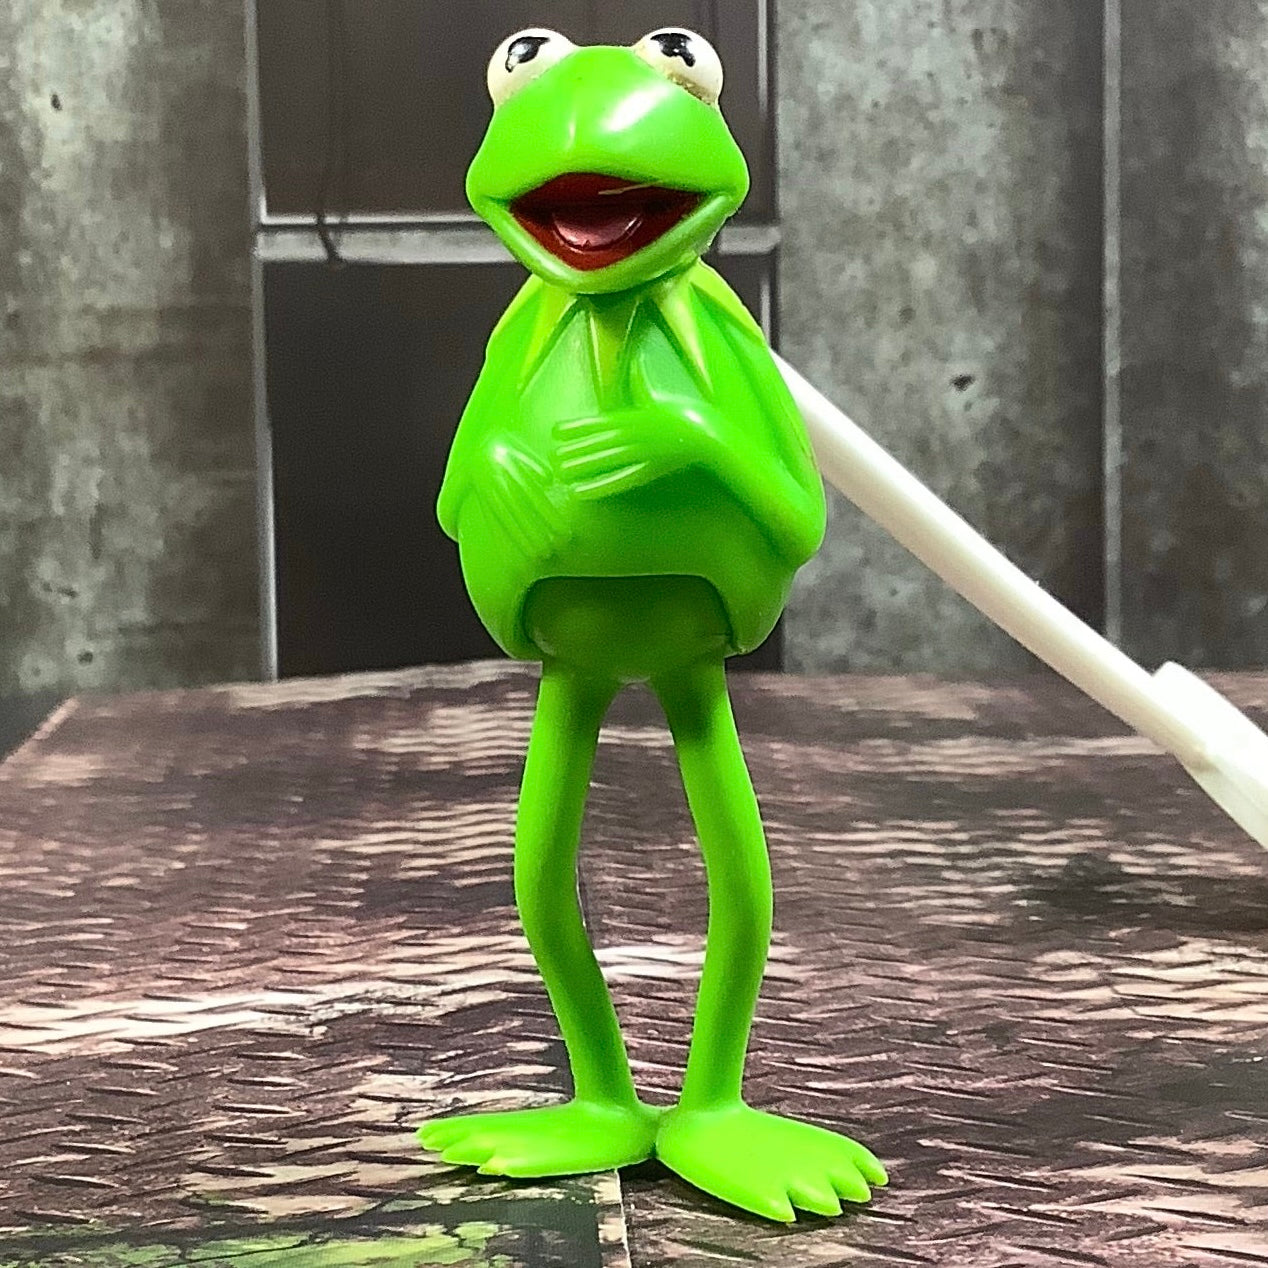 Fisher Price Stick Puppet: Kermit the Frog